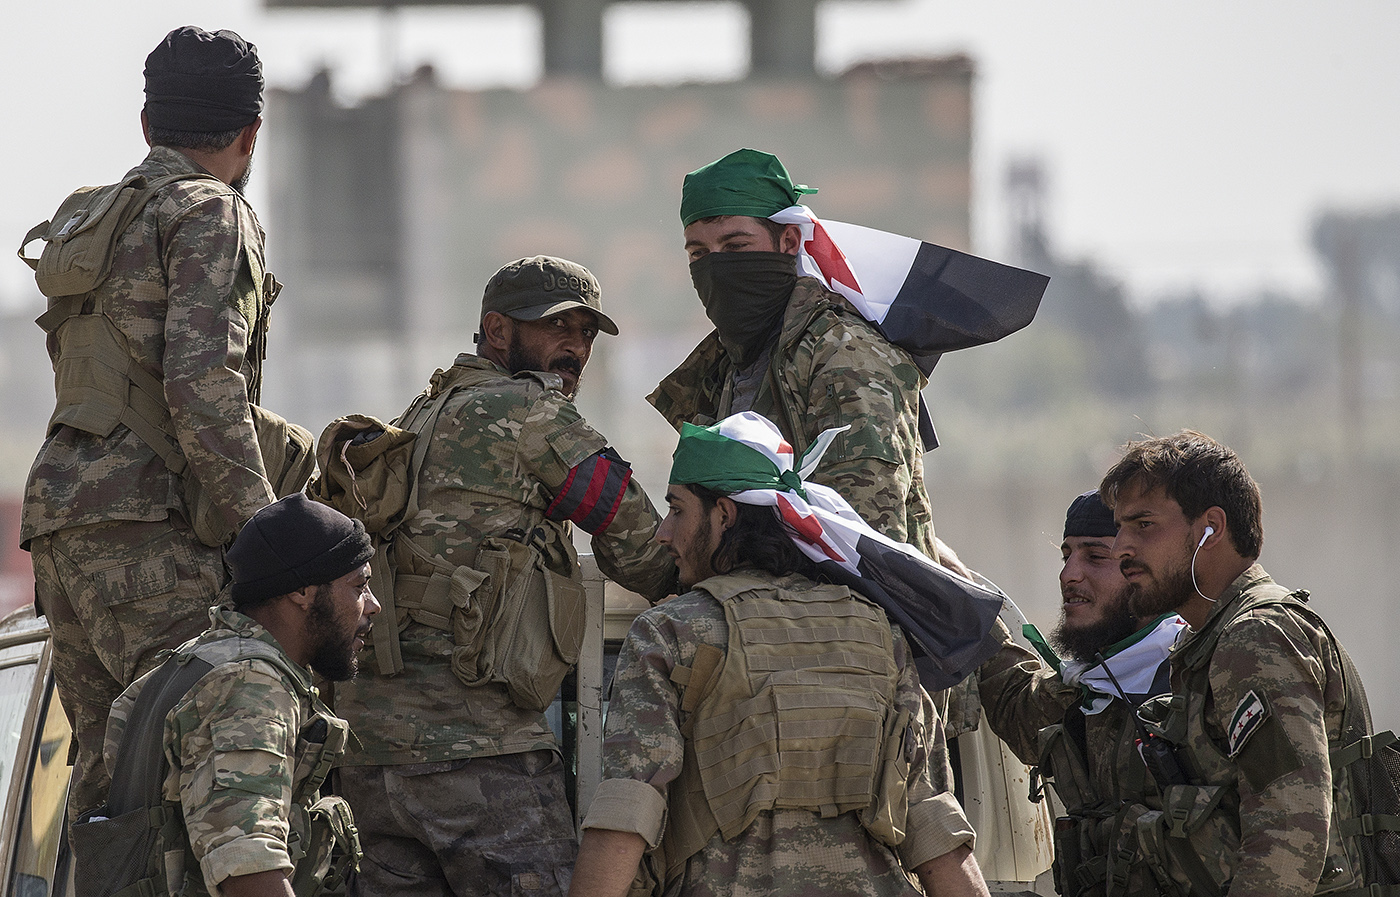 Turkish-backed Syrian fighters move on the way to Northern Syria for a military operation in Kurdish areas, near the Syrian border, in Akcakale district in Sanliurfa, Turkey, 15 October 2019.